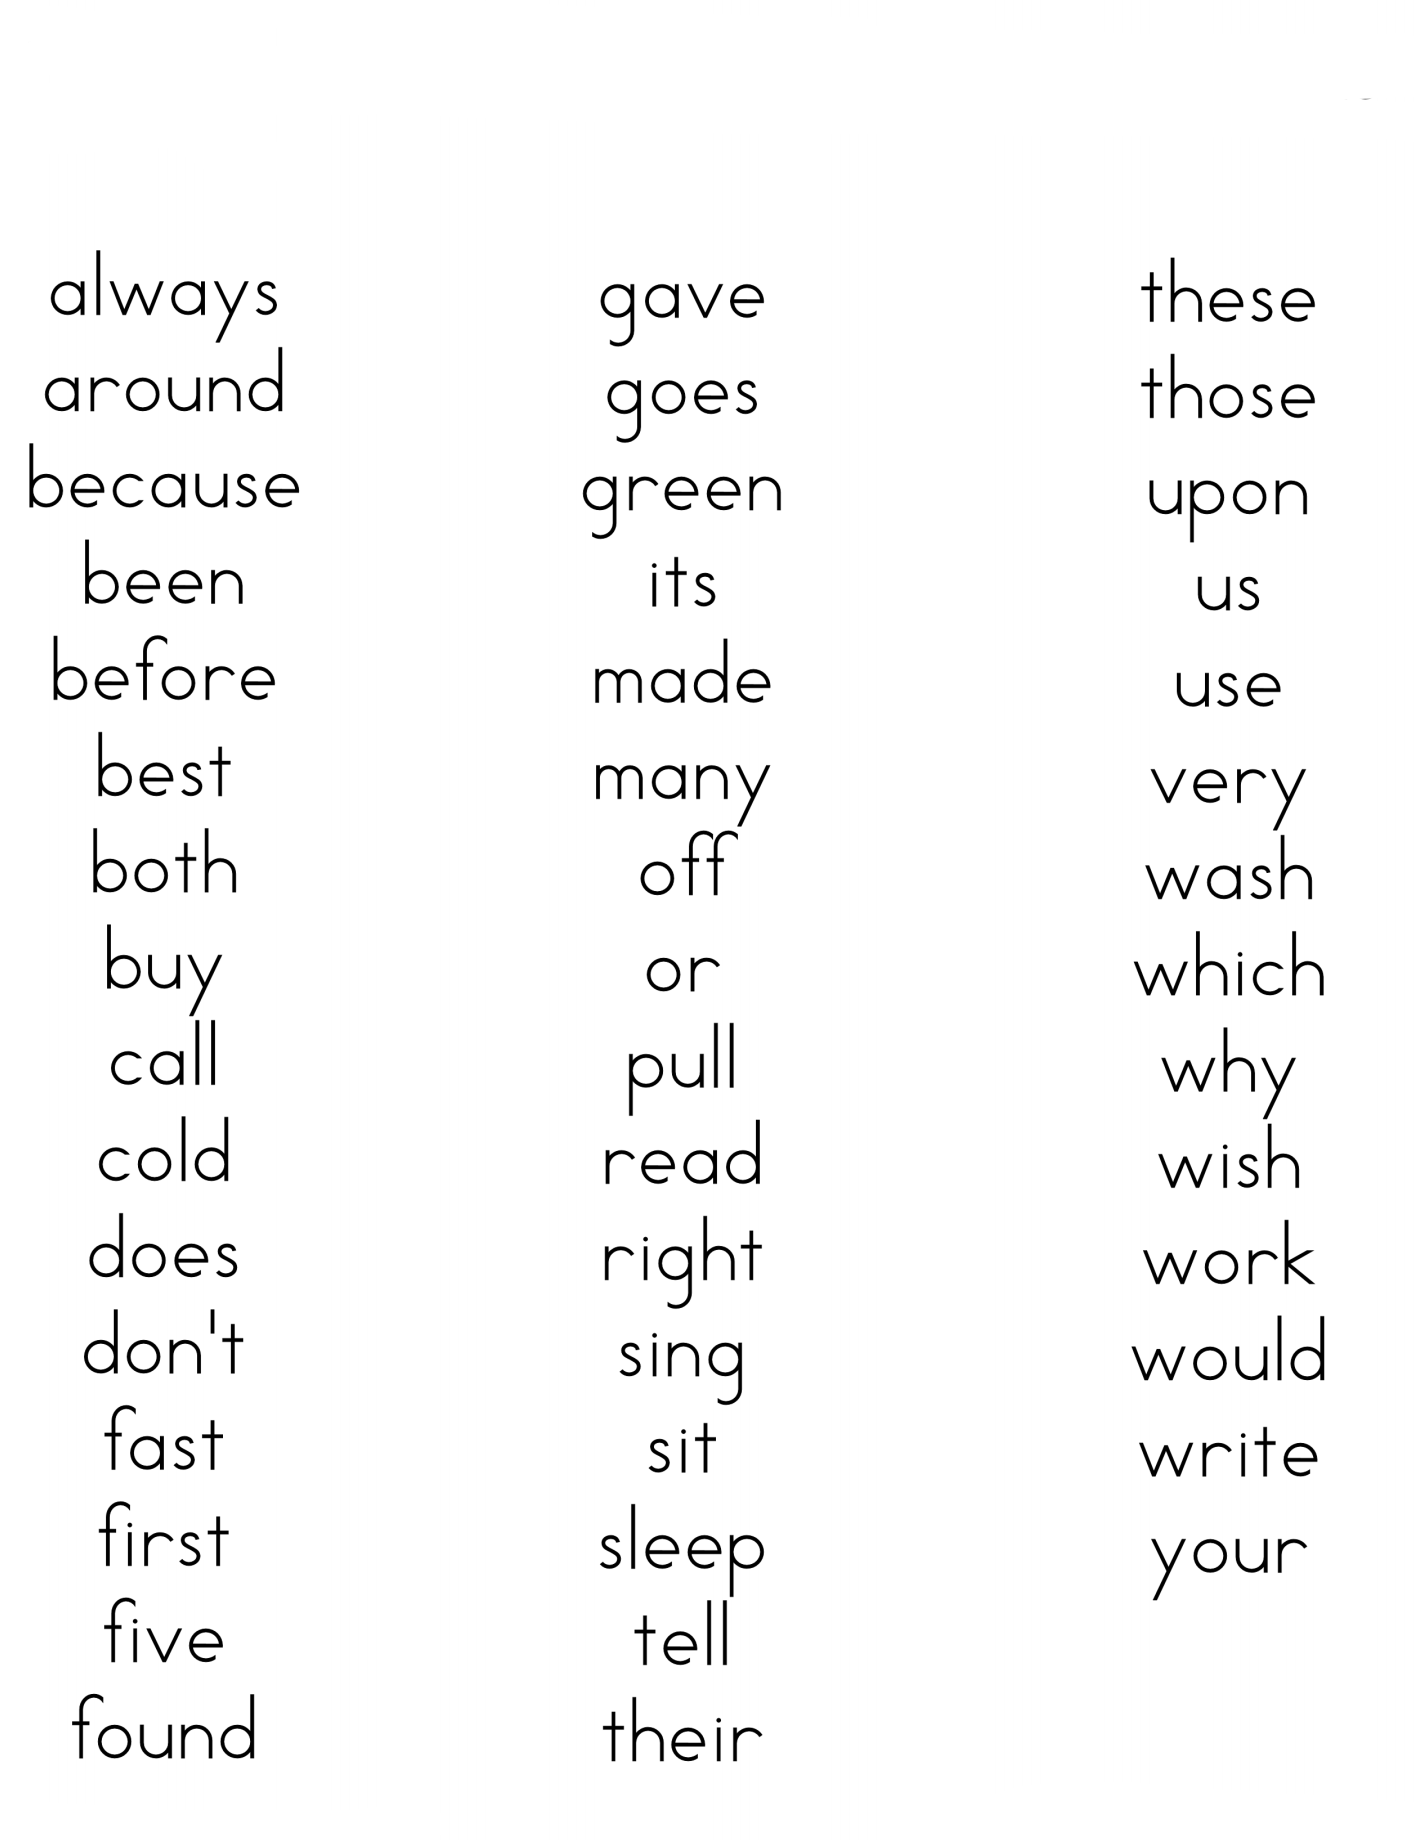 dolch sight word list 6th grade